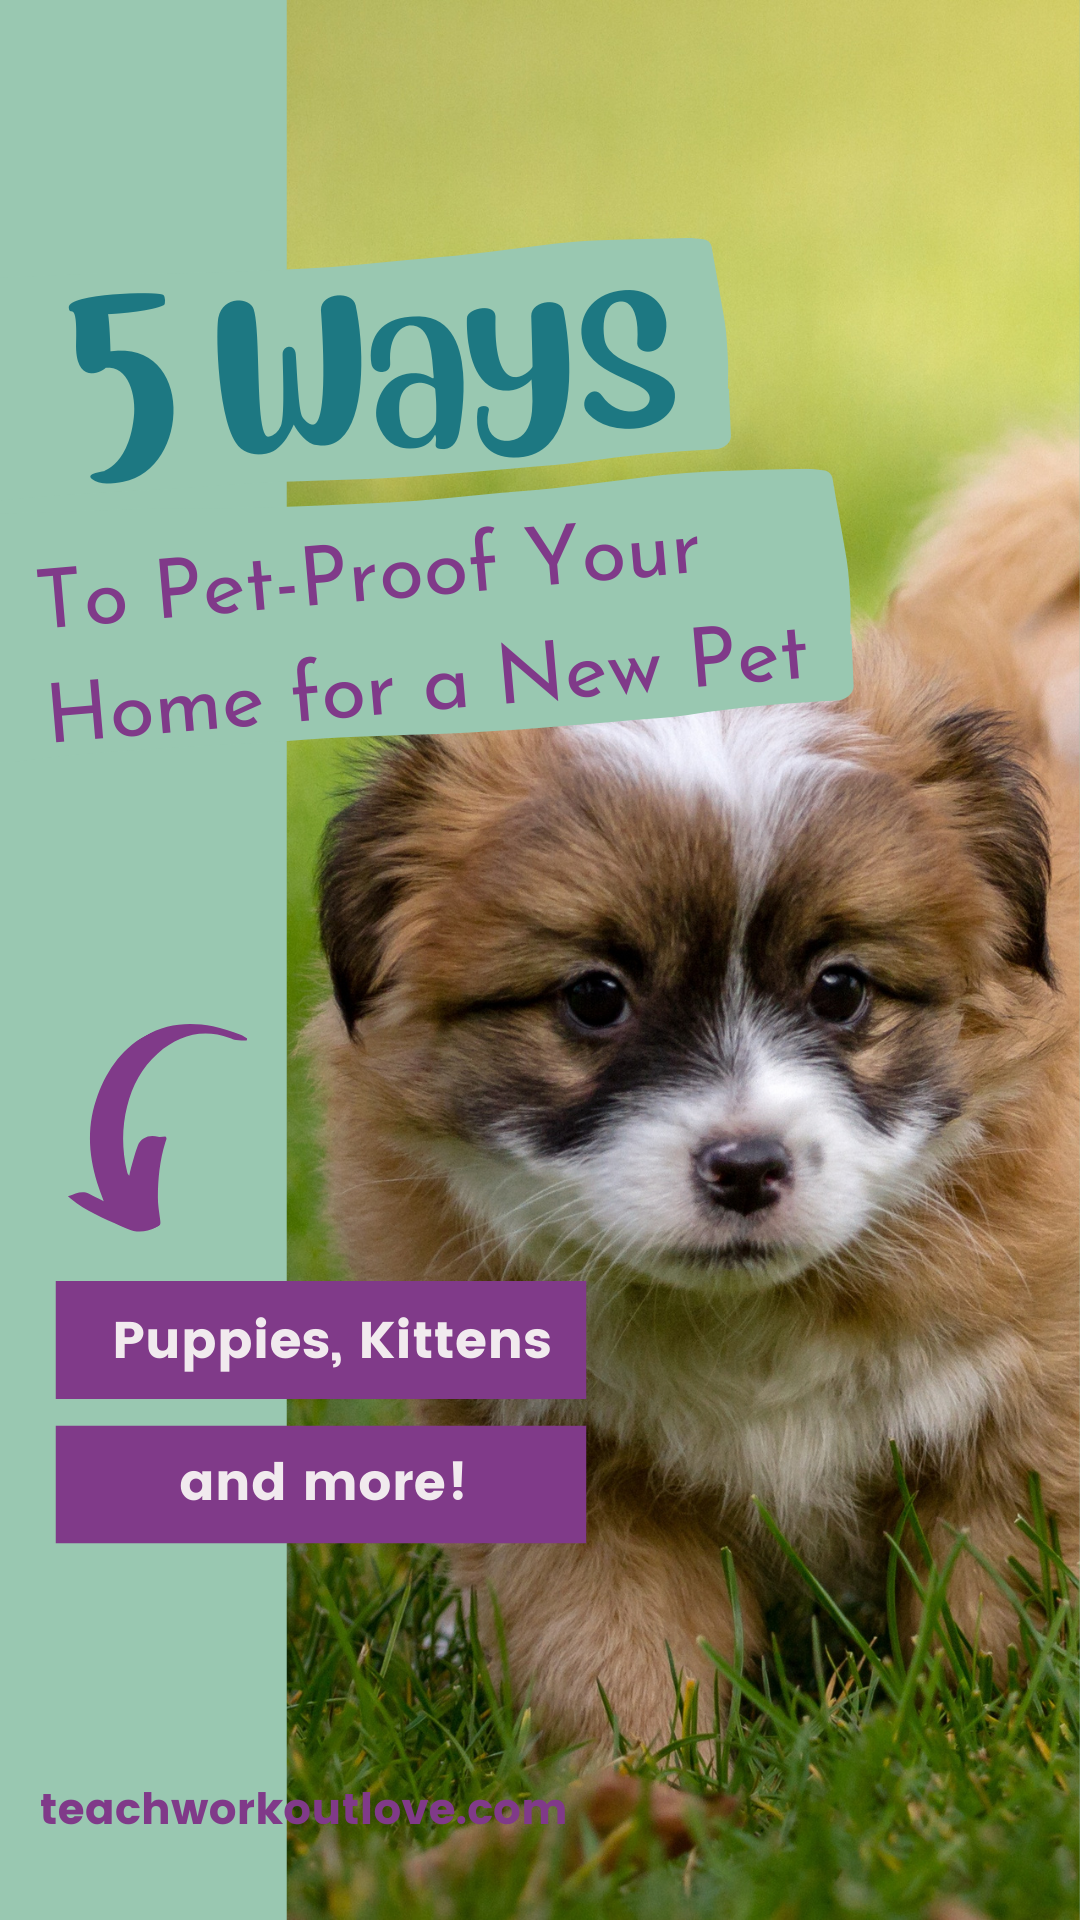 In this article, we’re going to be taking a look at some of the ways that you can pet-proof your home, so keep reading down below if you would like to find out more.